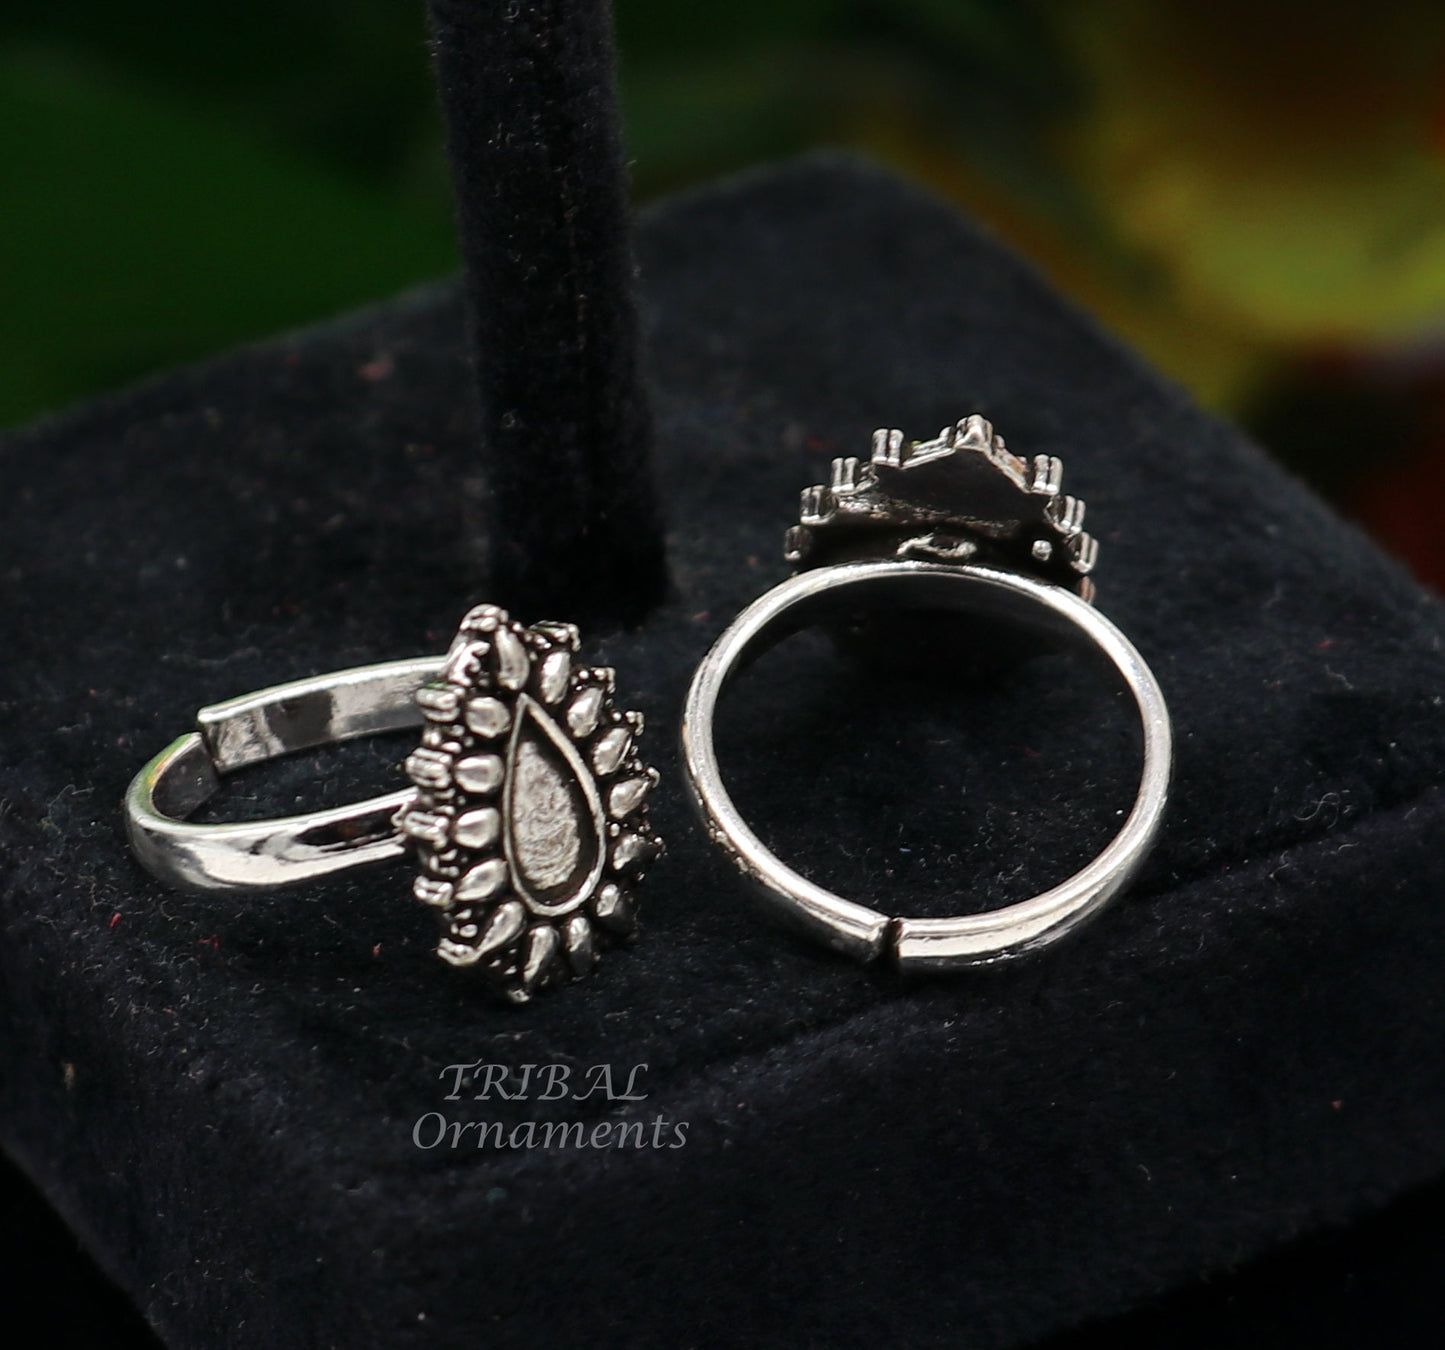 925 Sterling Silver Plated Adjustable Carving Pattern Vintage Style Toe Ring